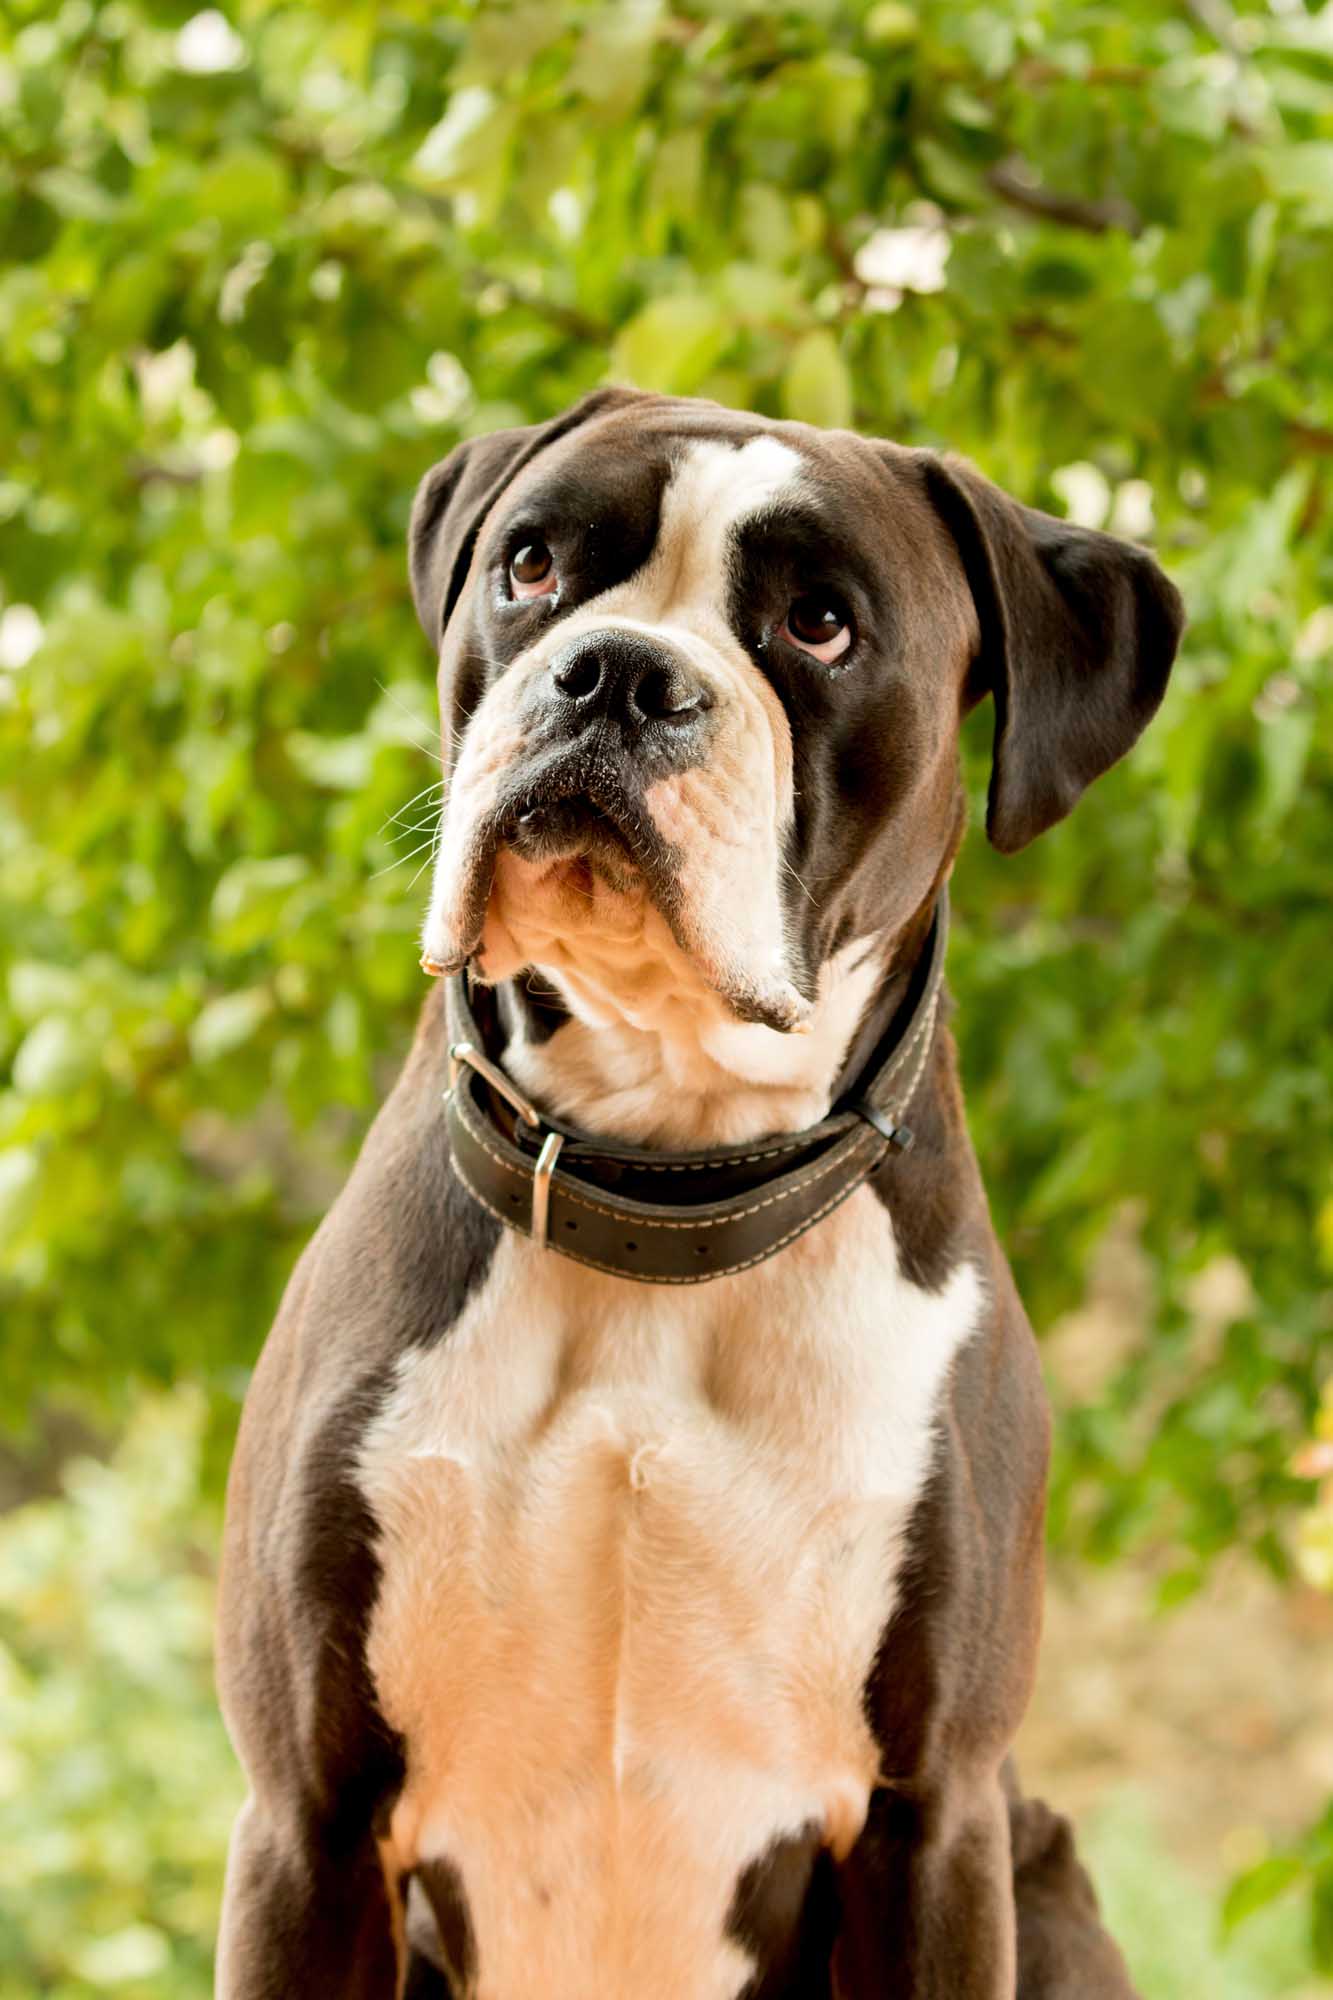 What are the Best Dog Foods for Boxers?